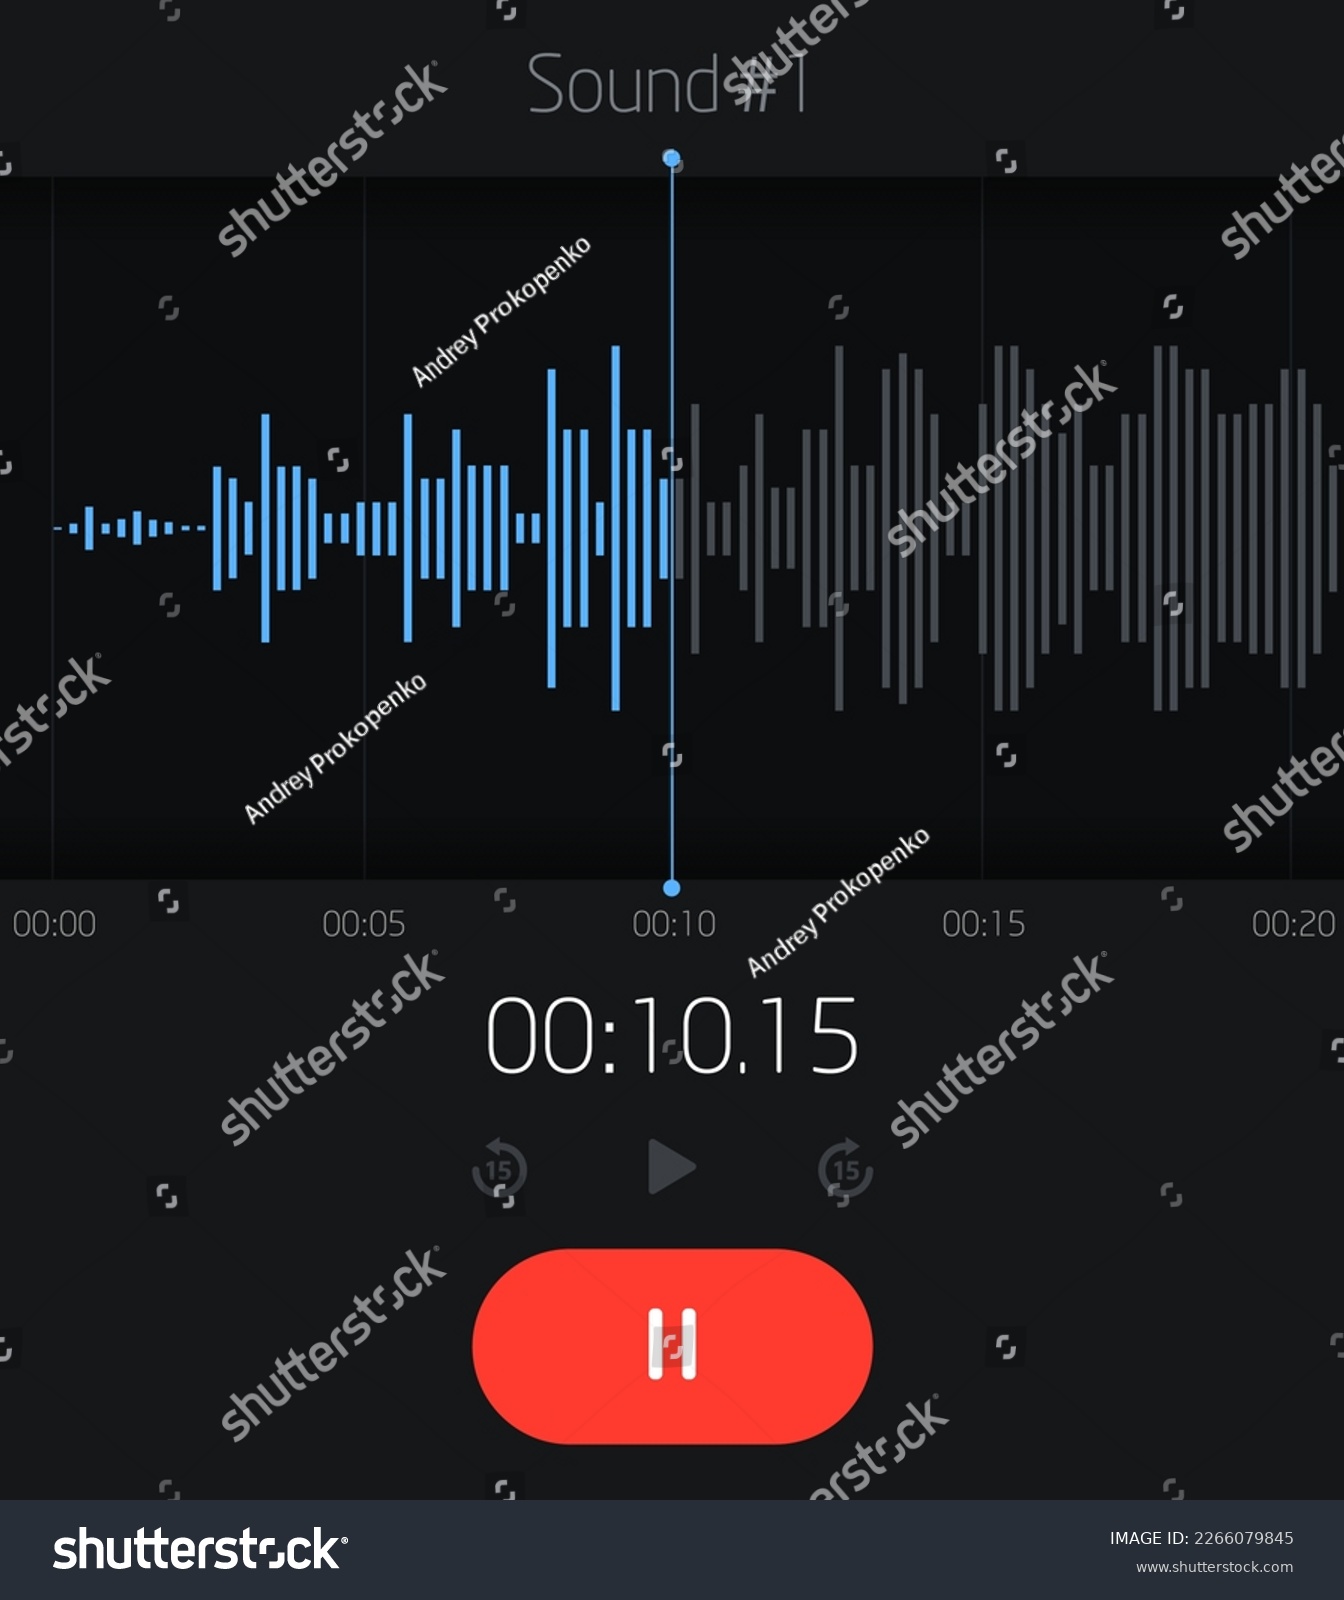 SVG of Audio player interface for creating music, recording voice or song. Audio player interface design. svg